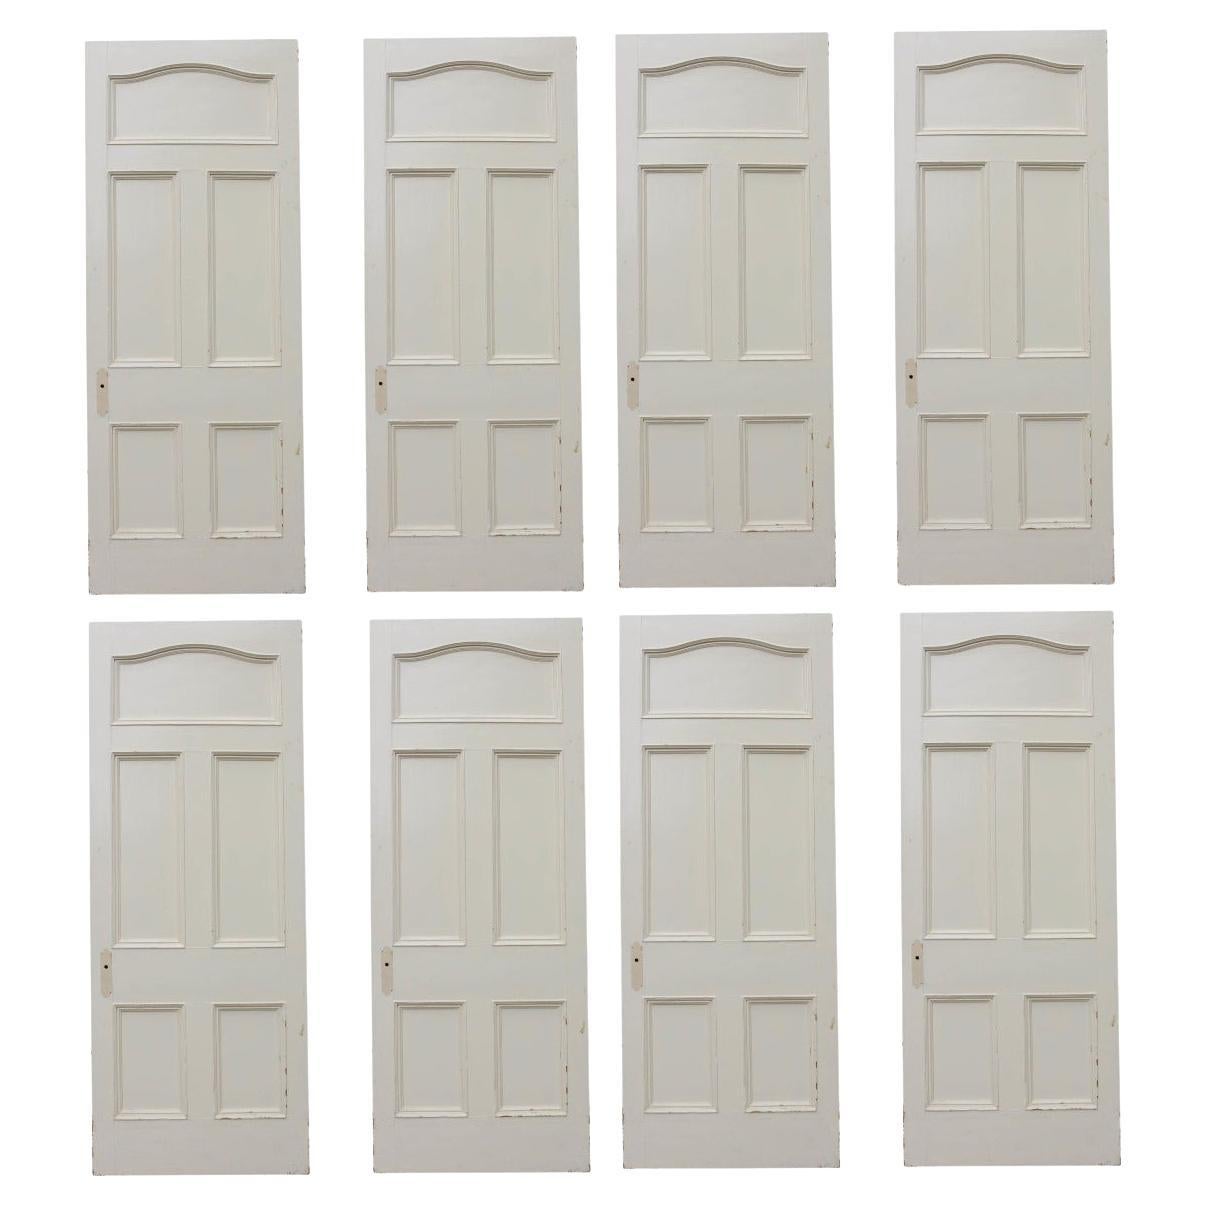 Set of Antique Painted Pine Doors '96 Available' For Sale